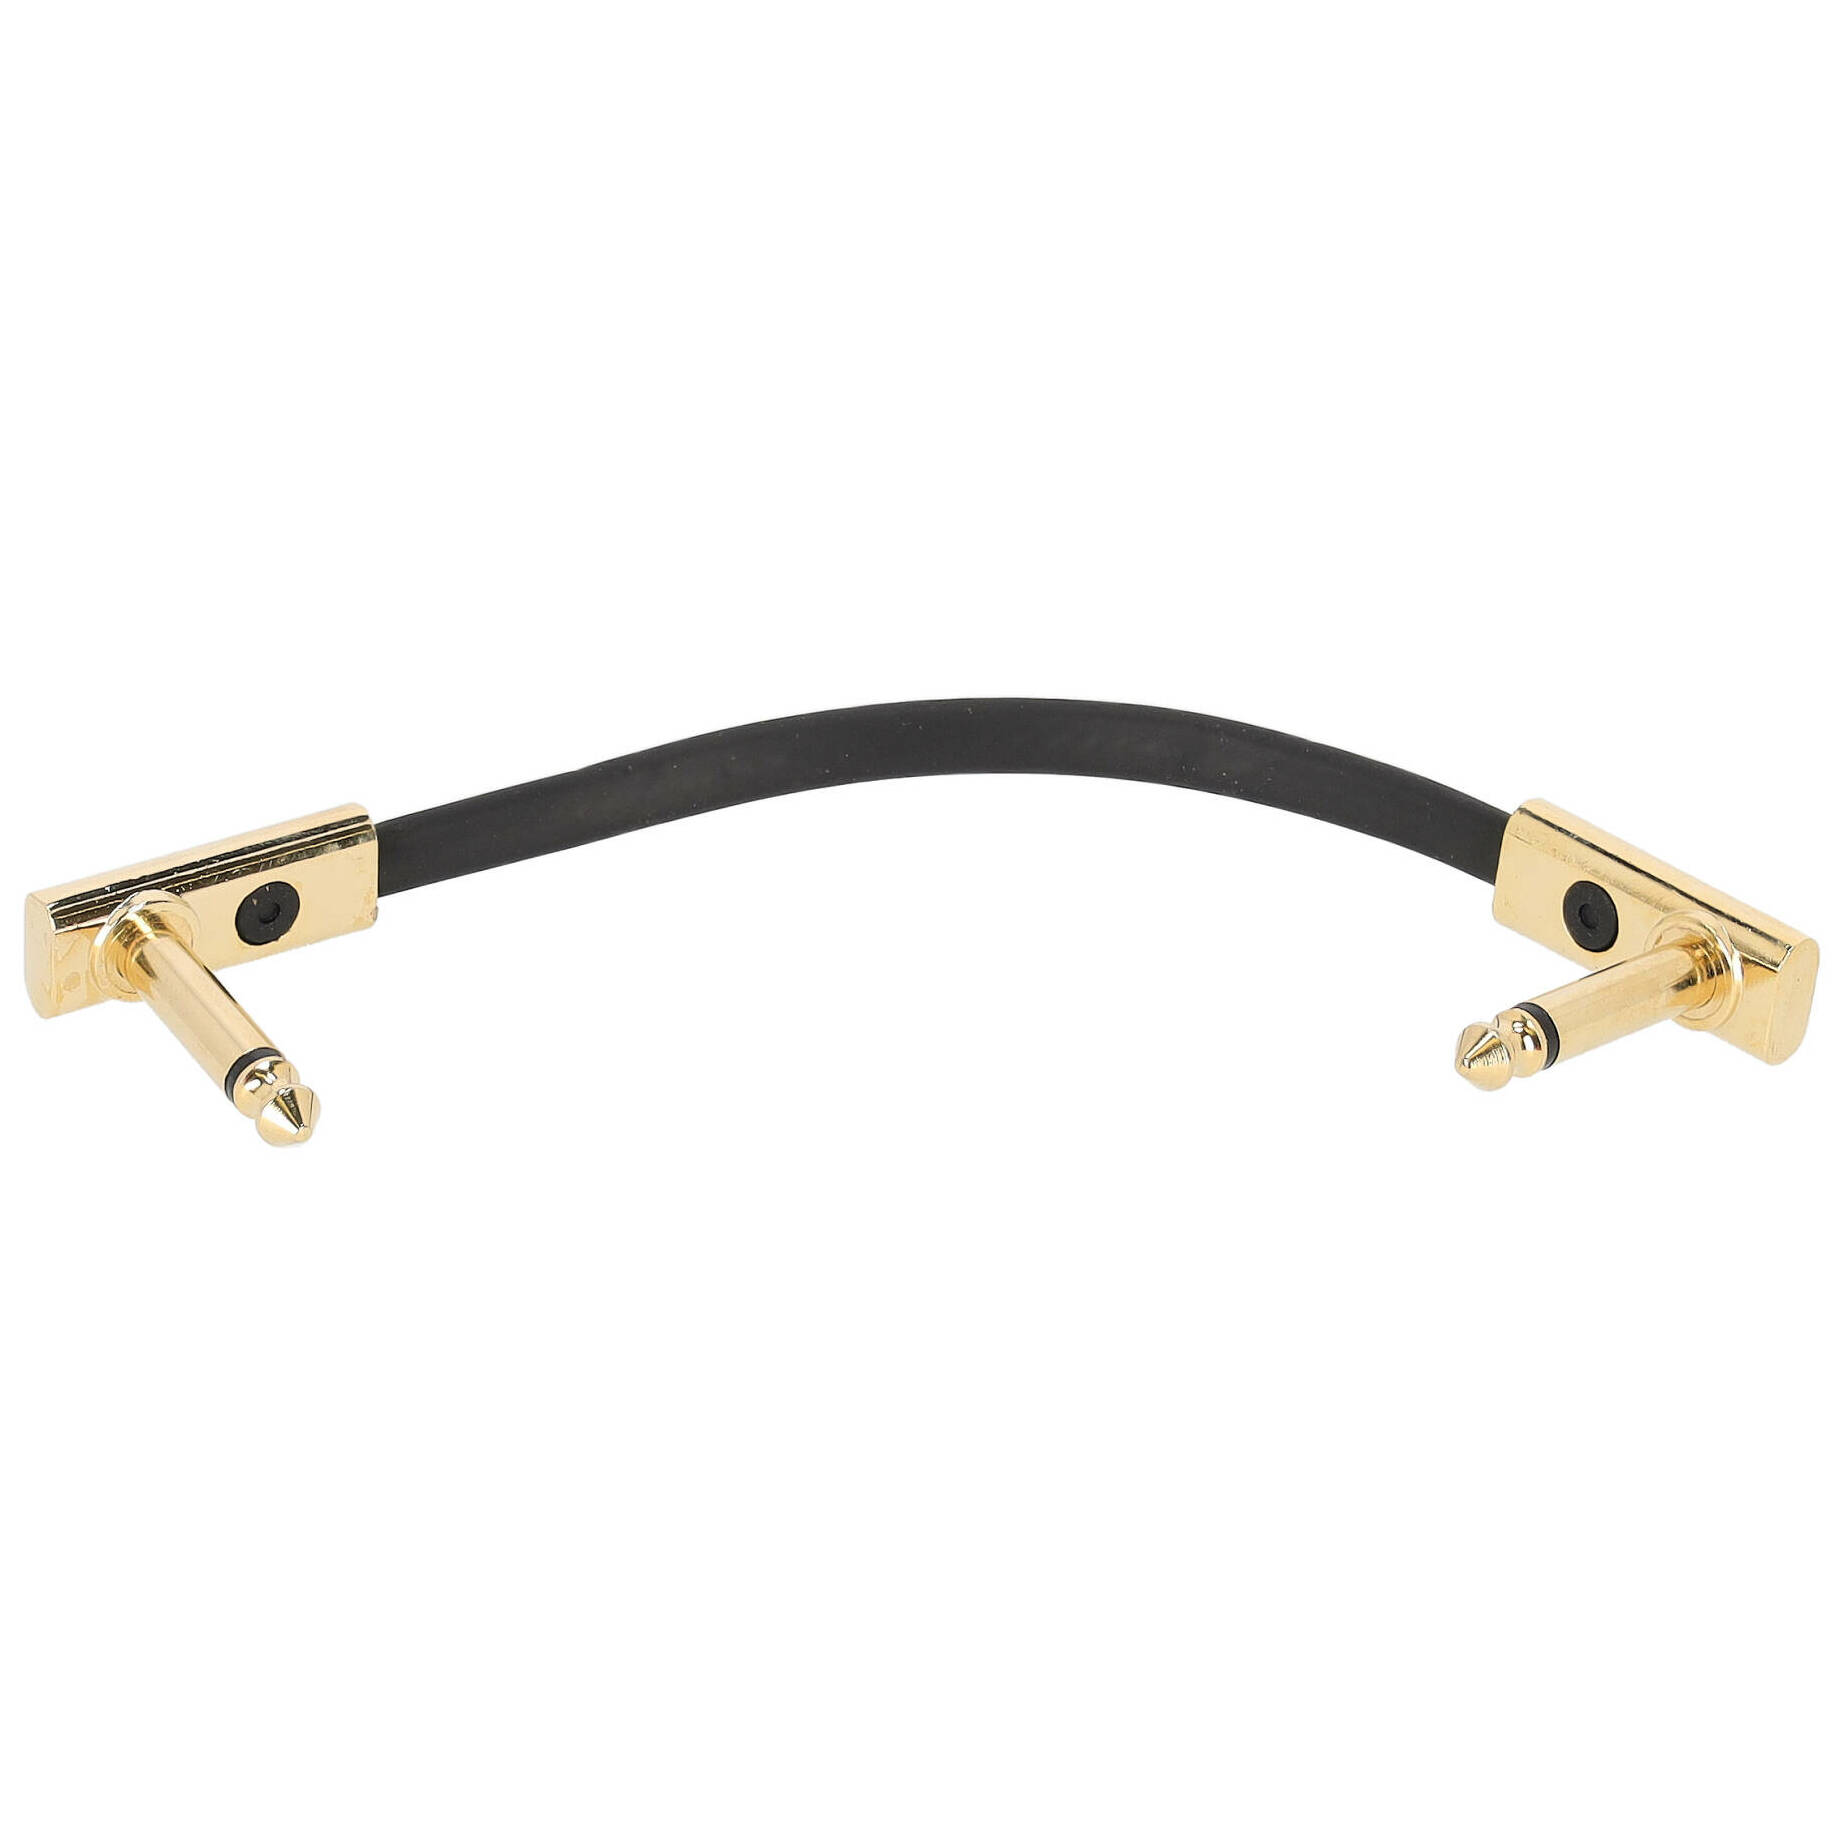 RockBoard Flat Patch Cable Gold 10 cm 1